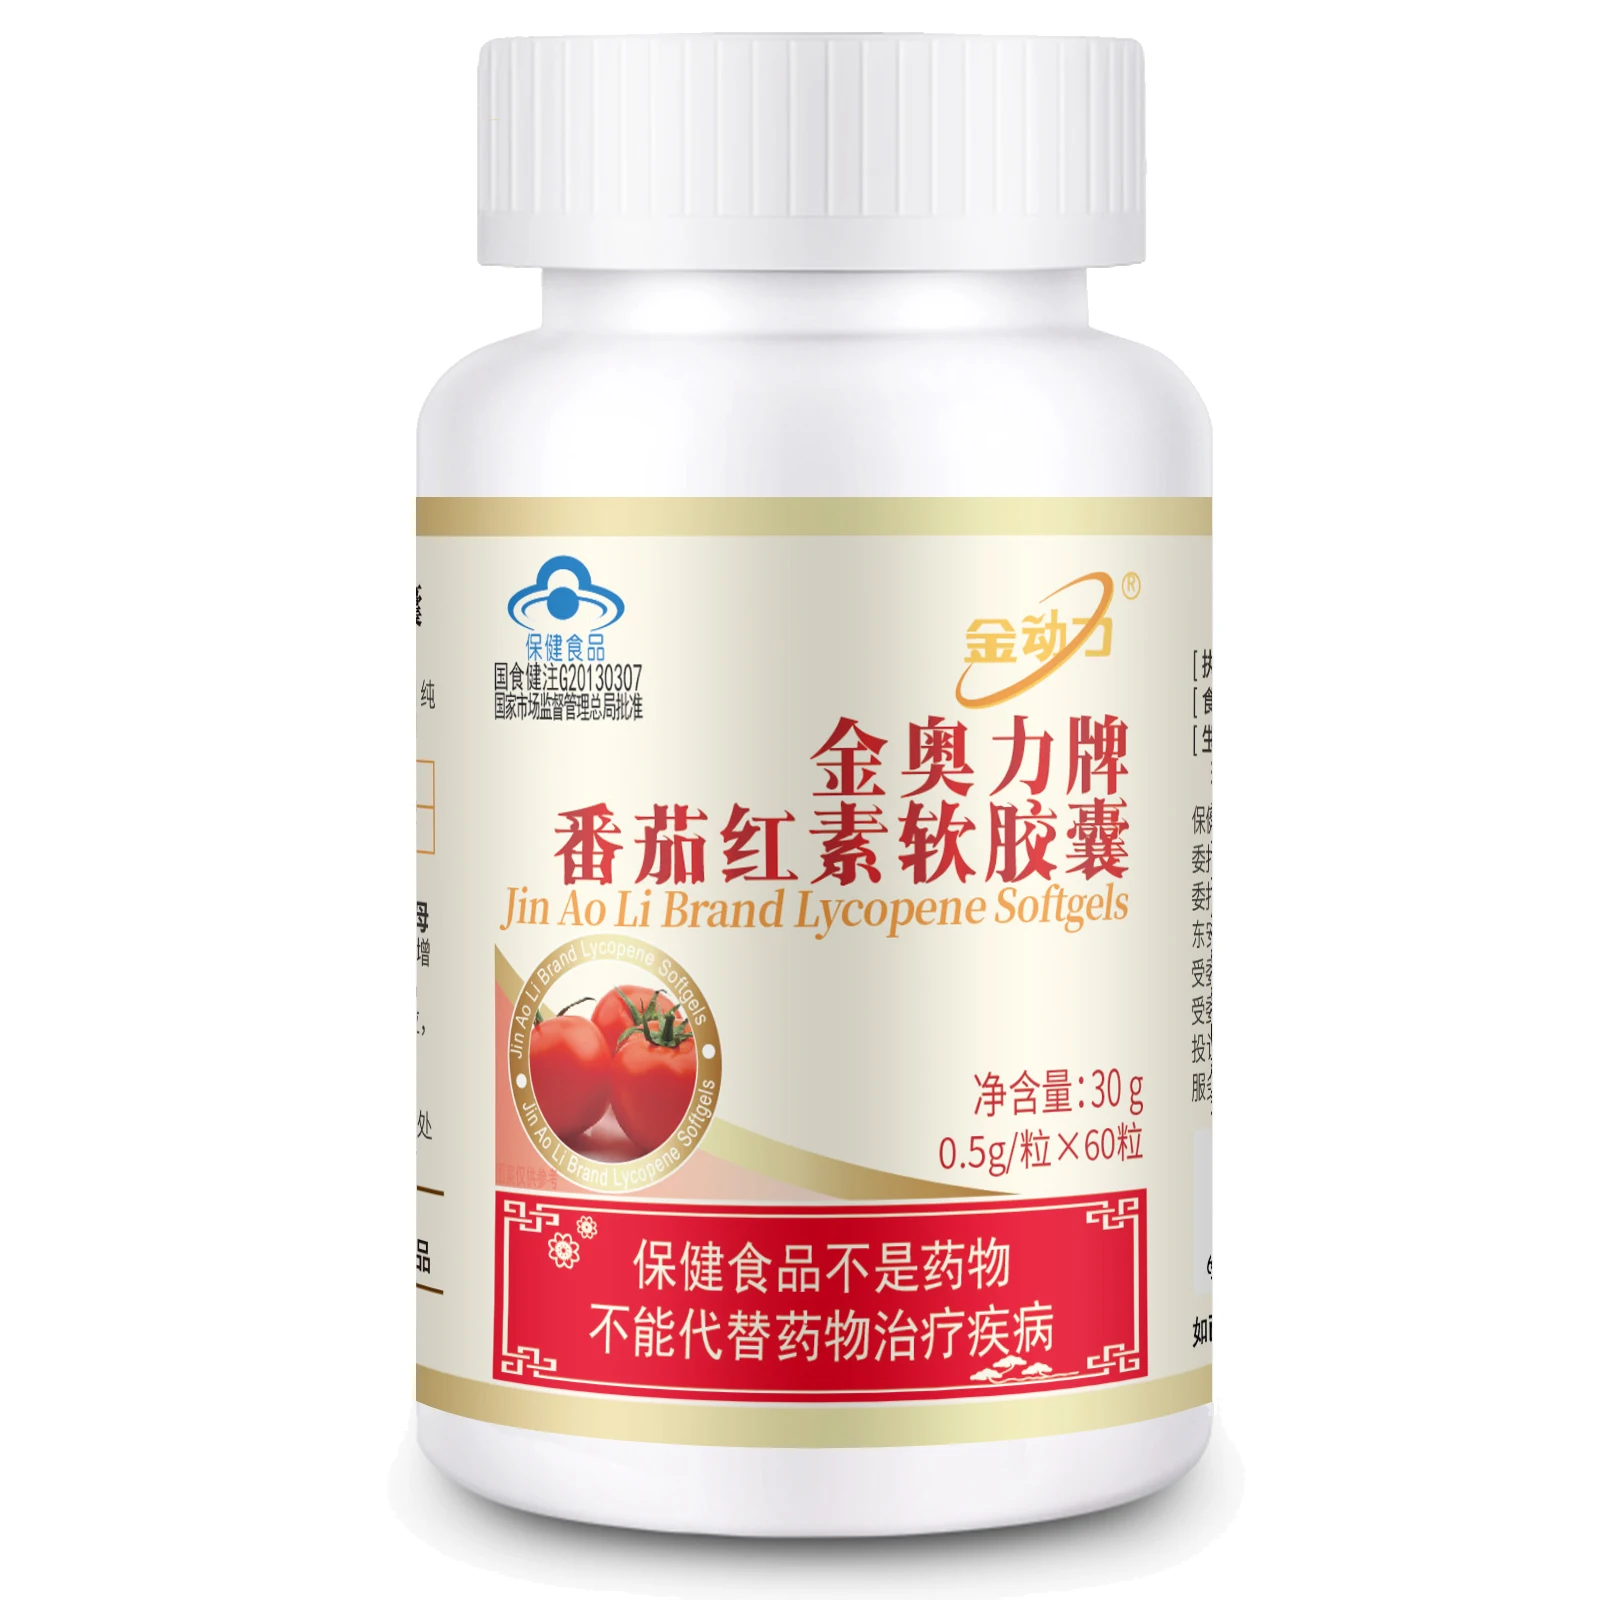 

3Bottle SUPPORT PROSTATE HEALTH Tomato Extract LYCOPENE SUPER ANTIOXIDANT Healthy Care 500mg x180Softgel